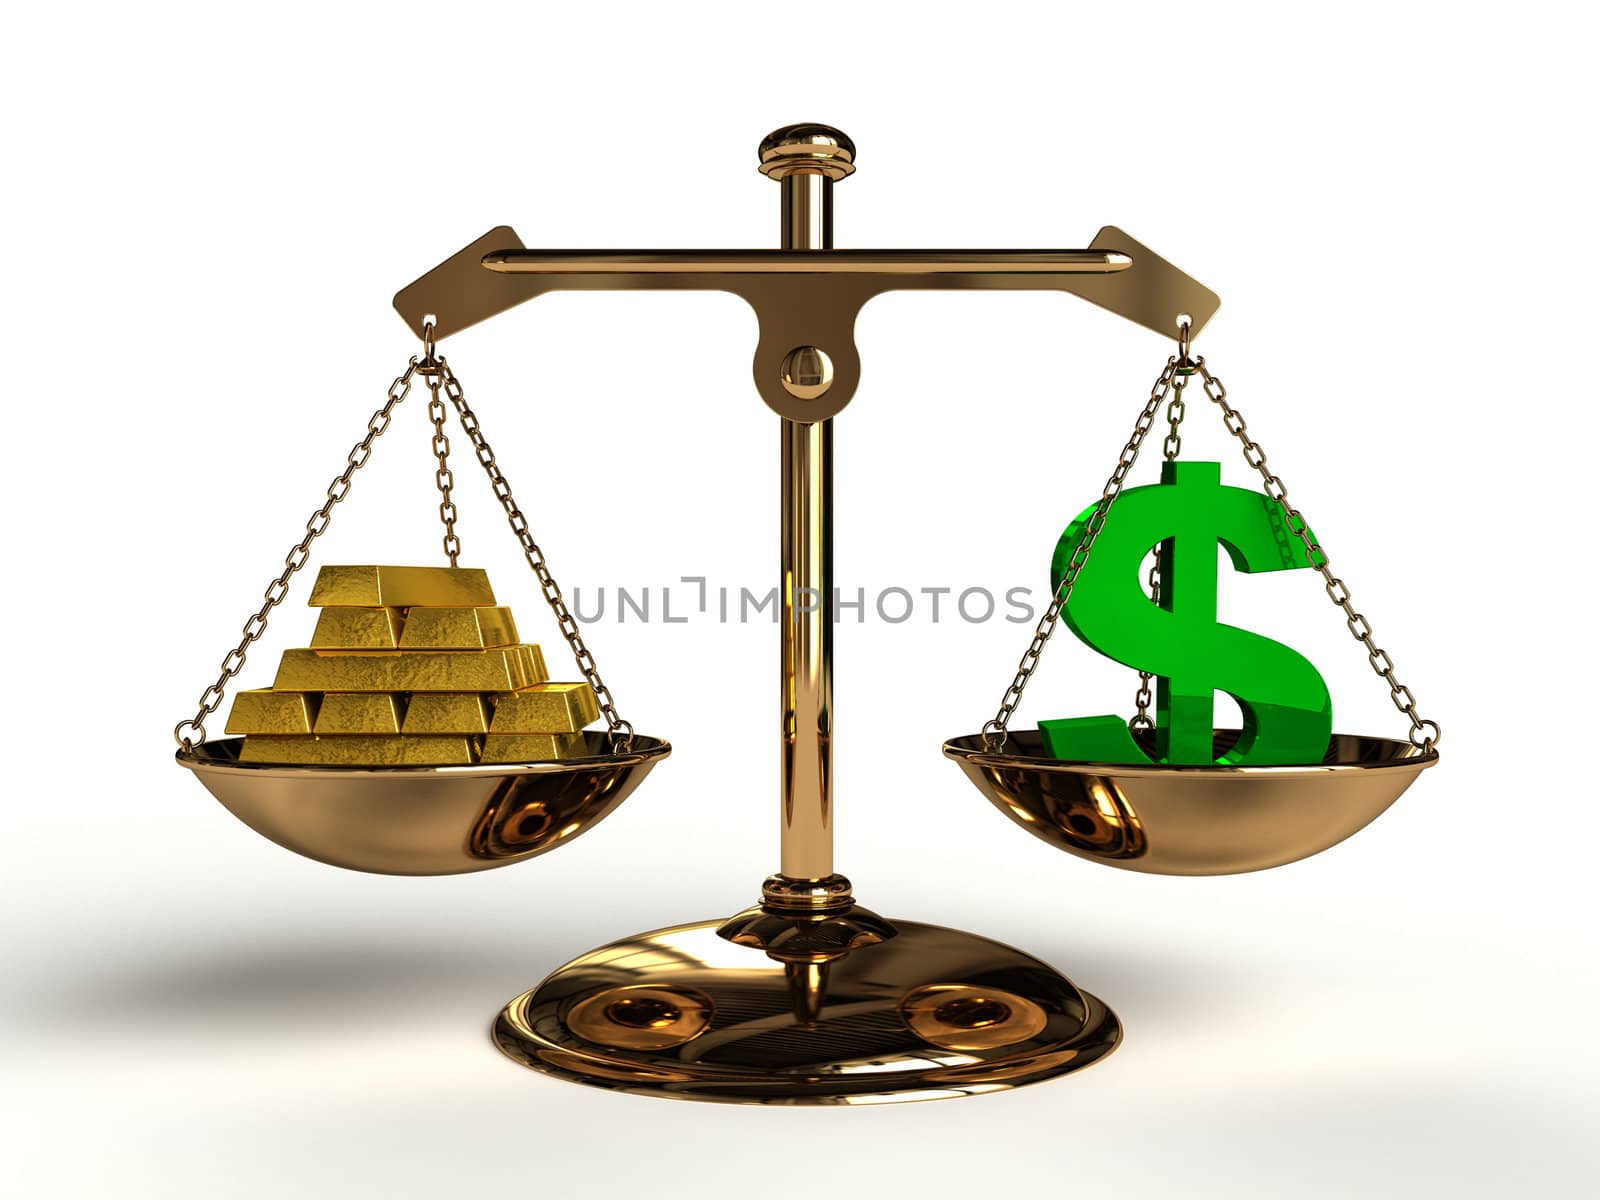 The value of Money. On a golden balance, are compared in a green dollar symbol and a lot of gold bullion, computer-generated conceptual image.